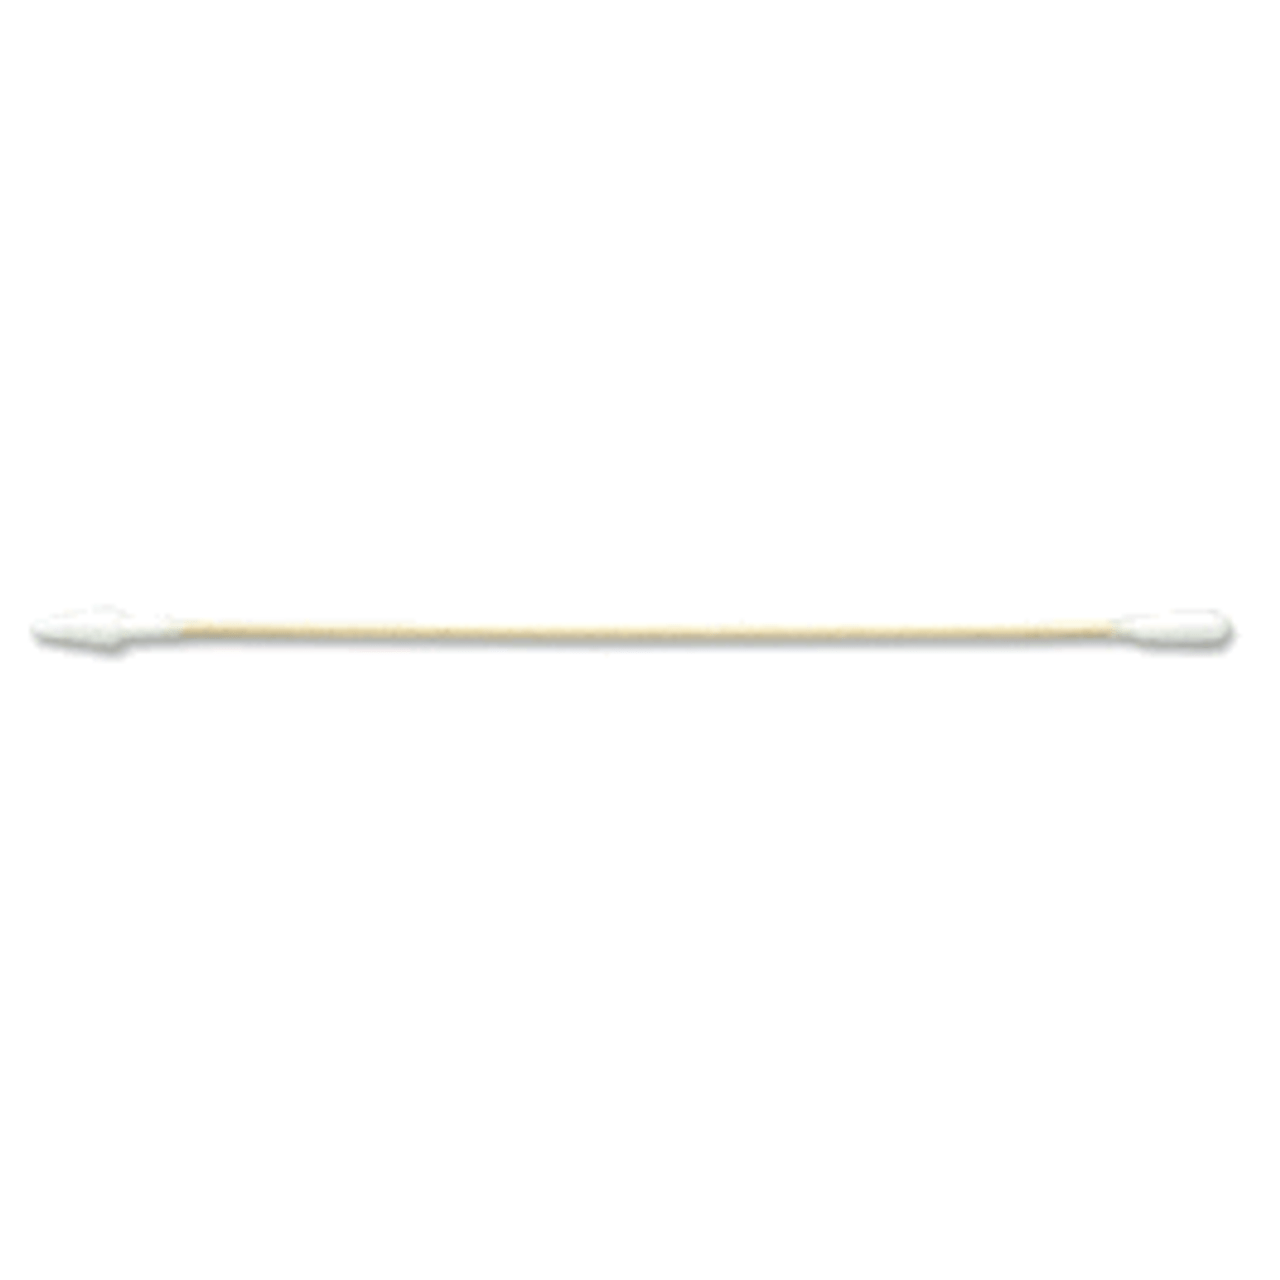 Cotton Swab, Double-Ended, One Tapered Tip- One Regular Size Tip, Wood  Handle, 6